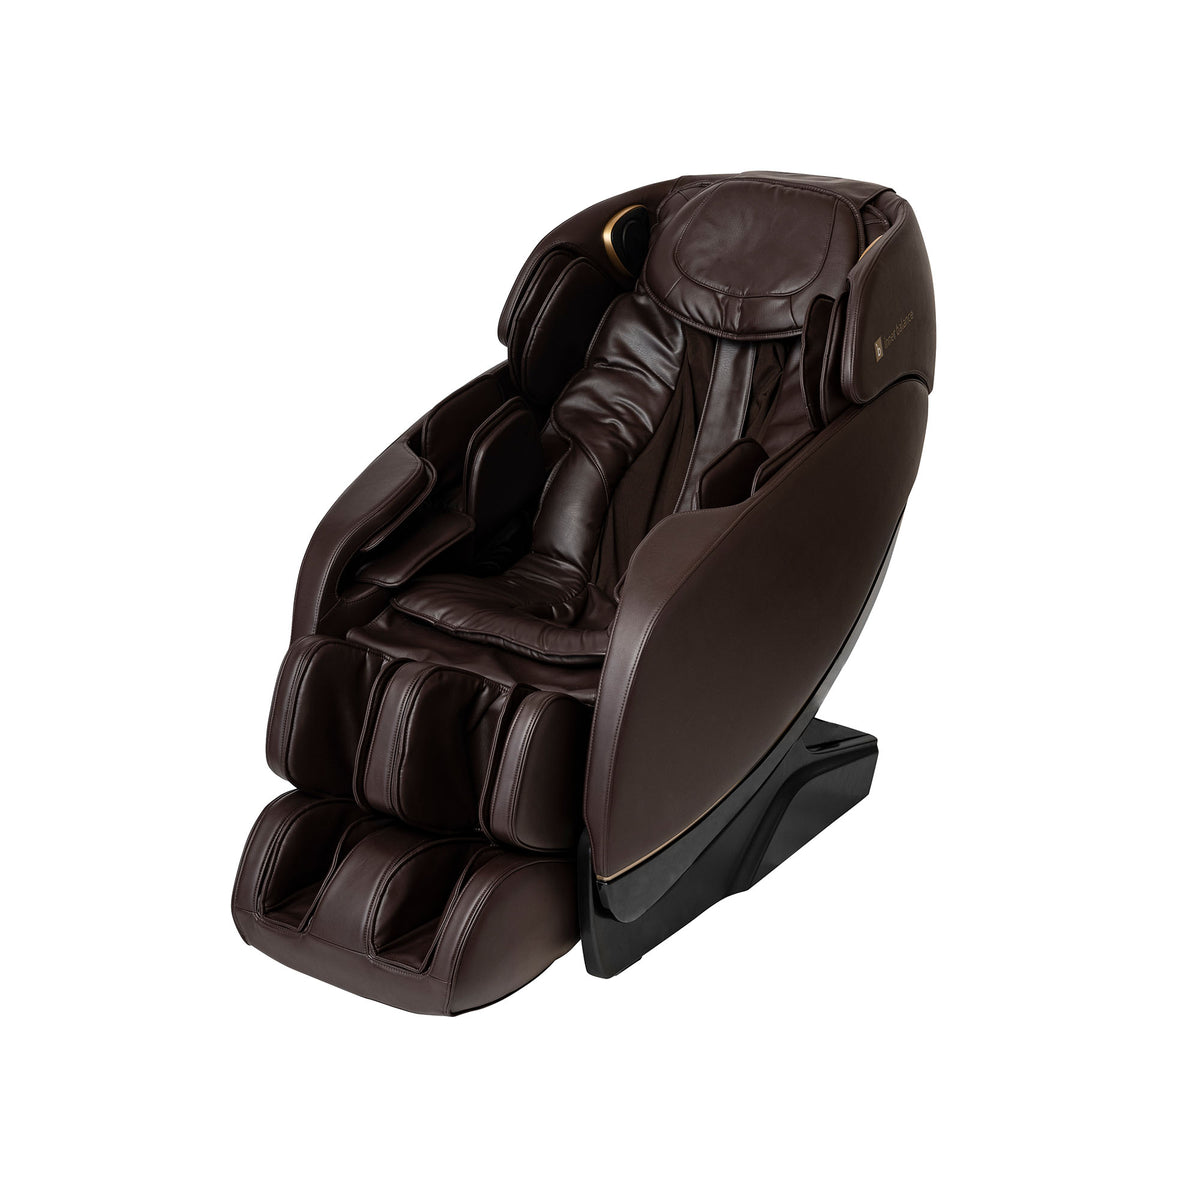 Inner Balance Wellness Jin 2.0 Massage Chair in brown leather finish